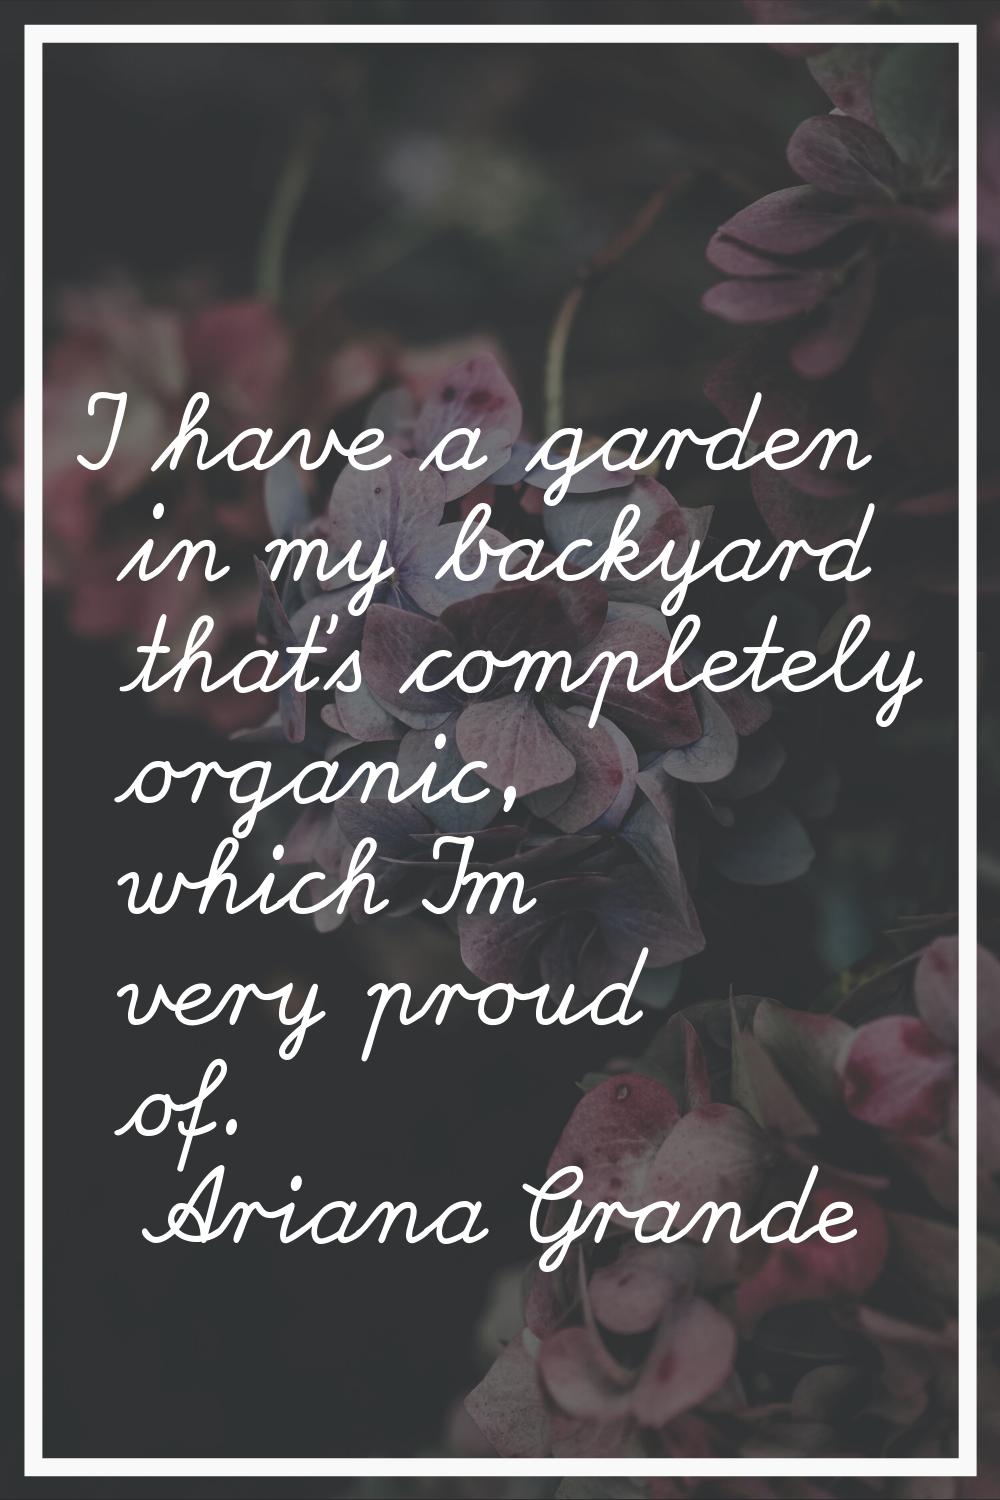 I have a garden in my backyard that's completely organic, which I'm very proud of.